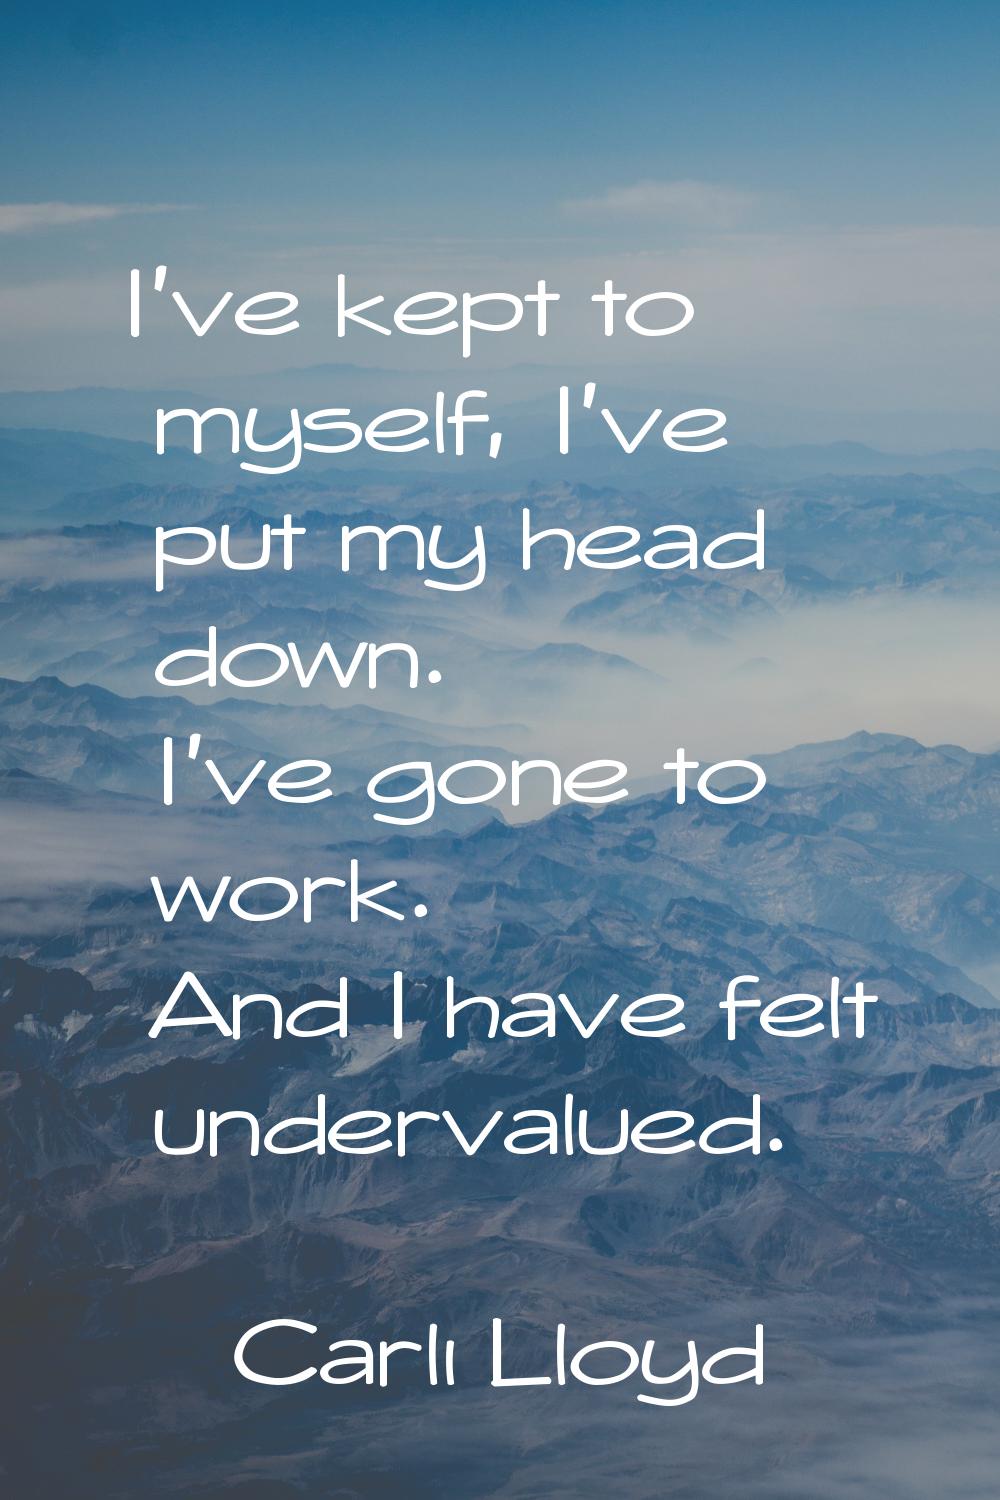 I've kept to myself, I've put my head down. I've gone to work. And I have felt undervalued.